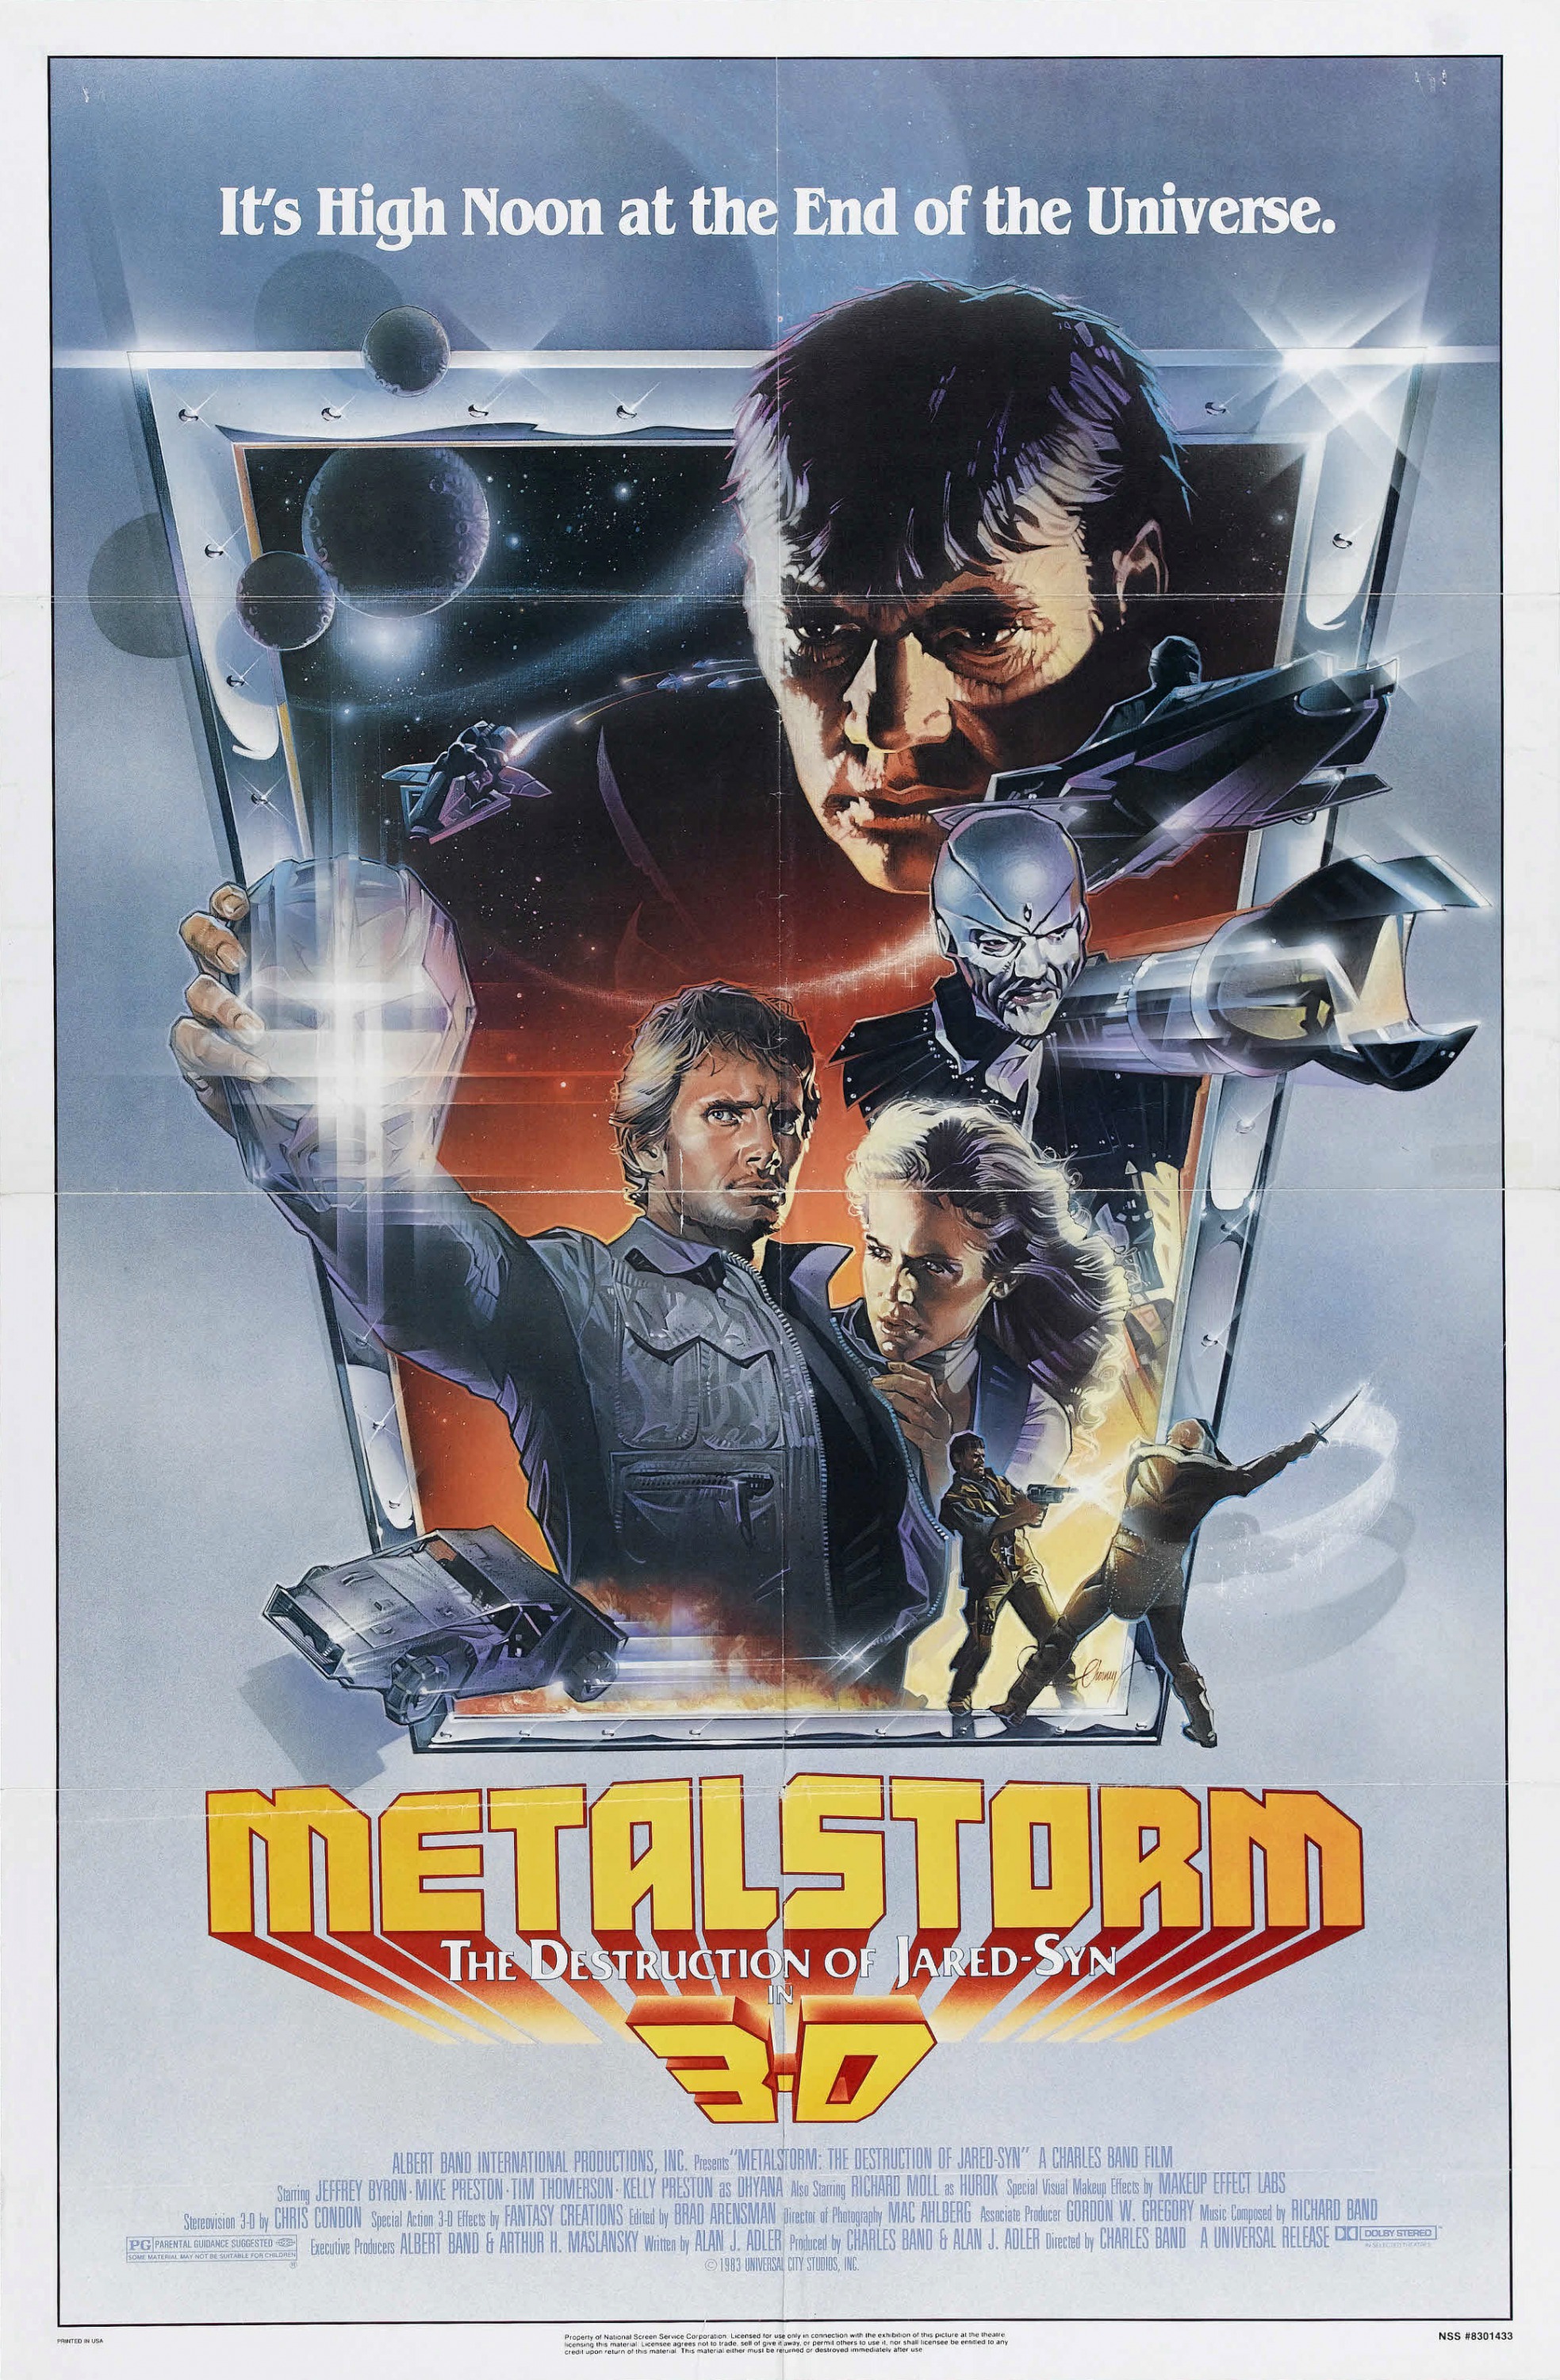 Mega Sized Movie Poster Image for Metalstorm: The Destruction of Jared-Syn (#1 of 2)